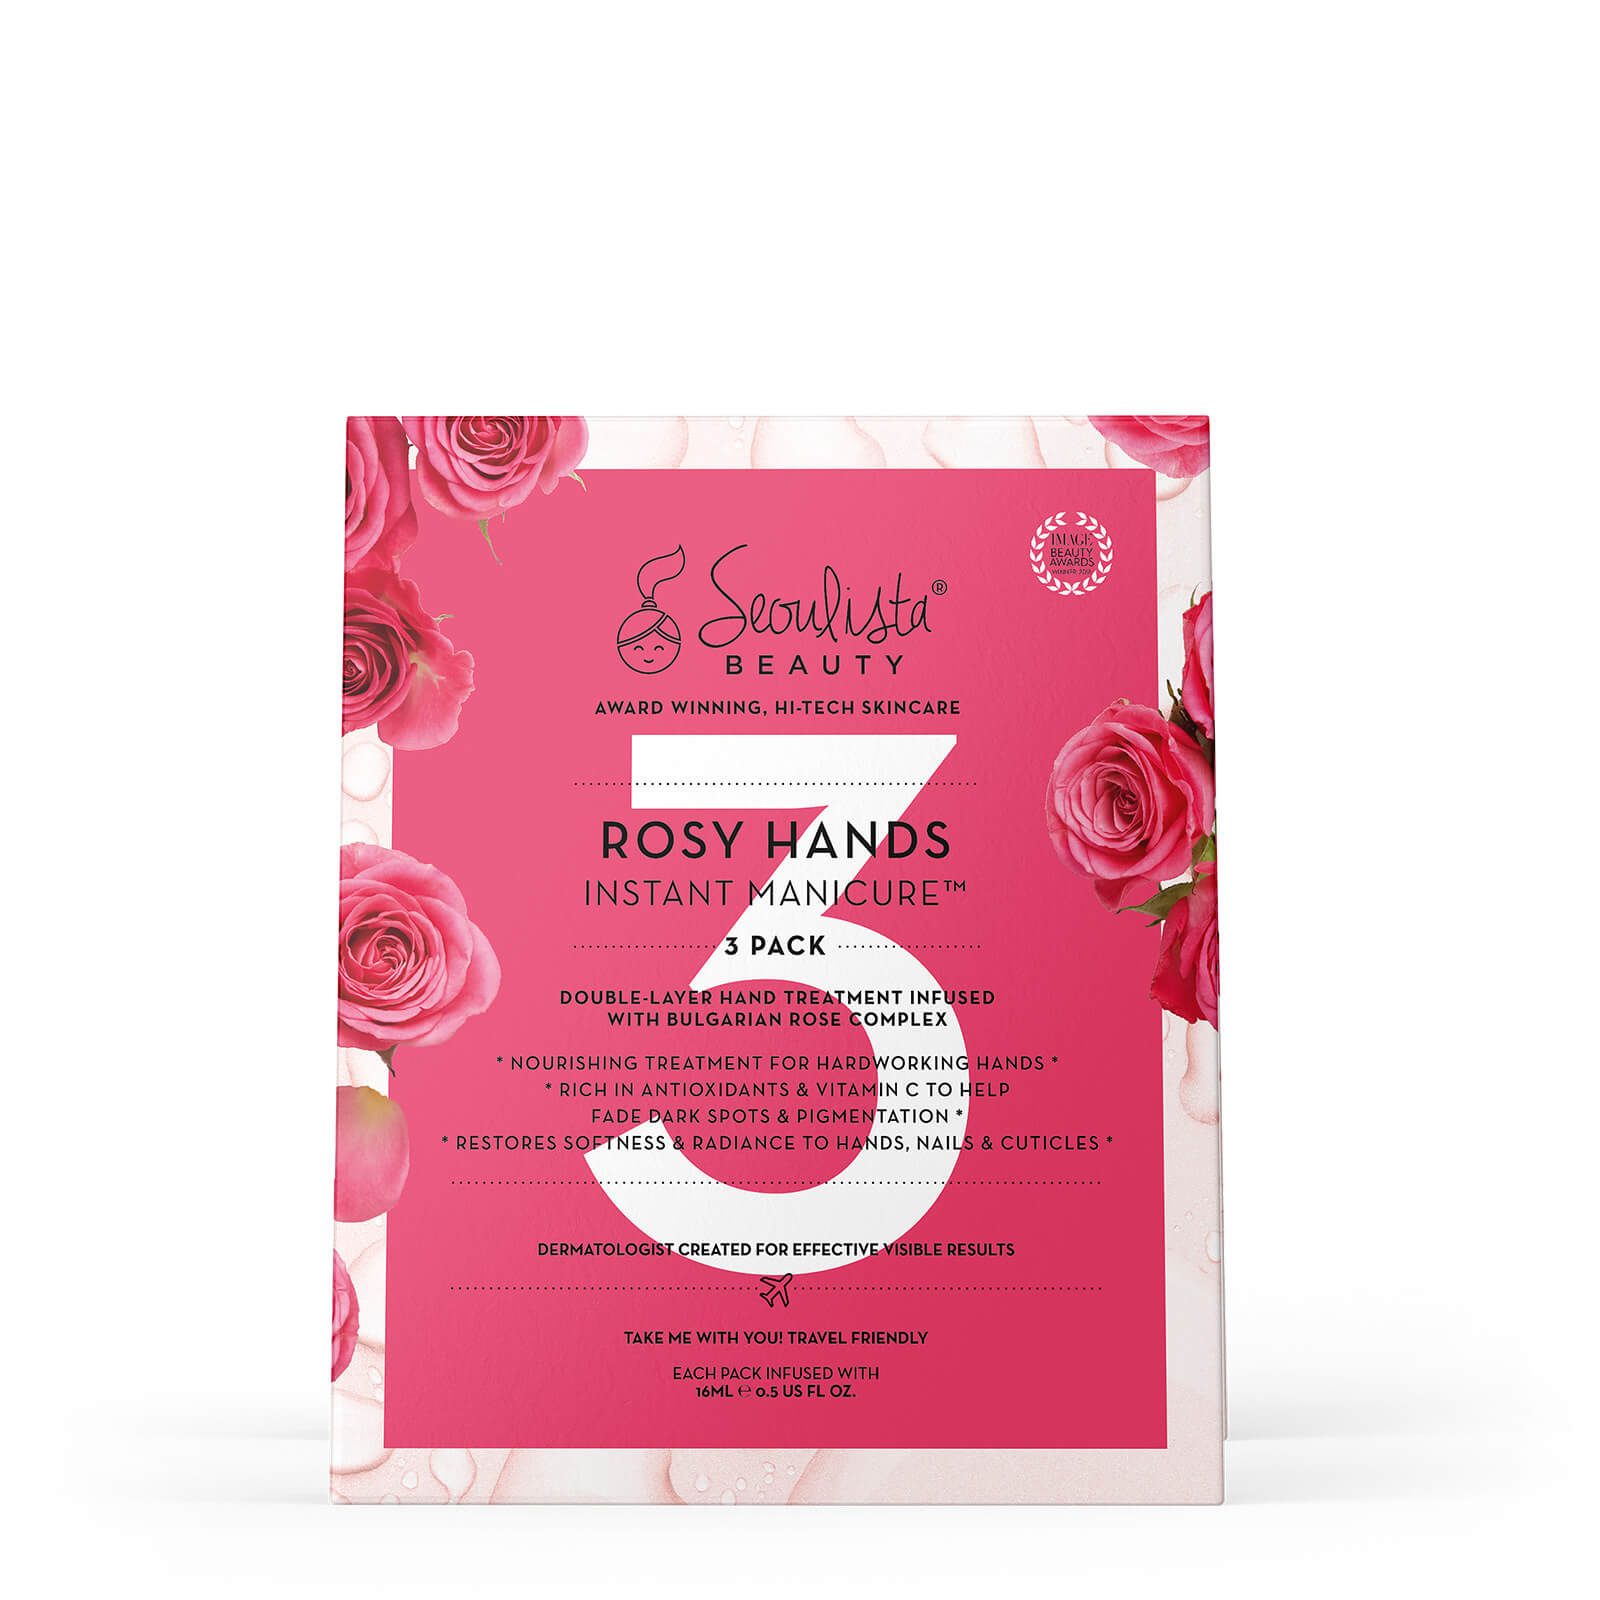 Seoulista Beauty Rosy Hands Instant Manicure Multipack